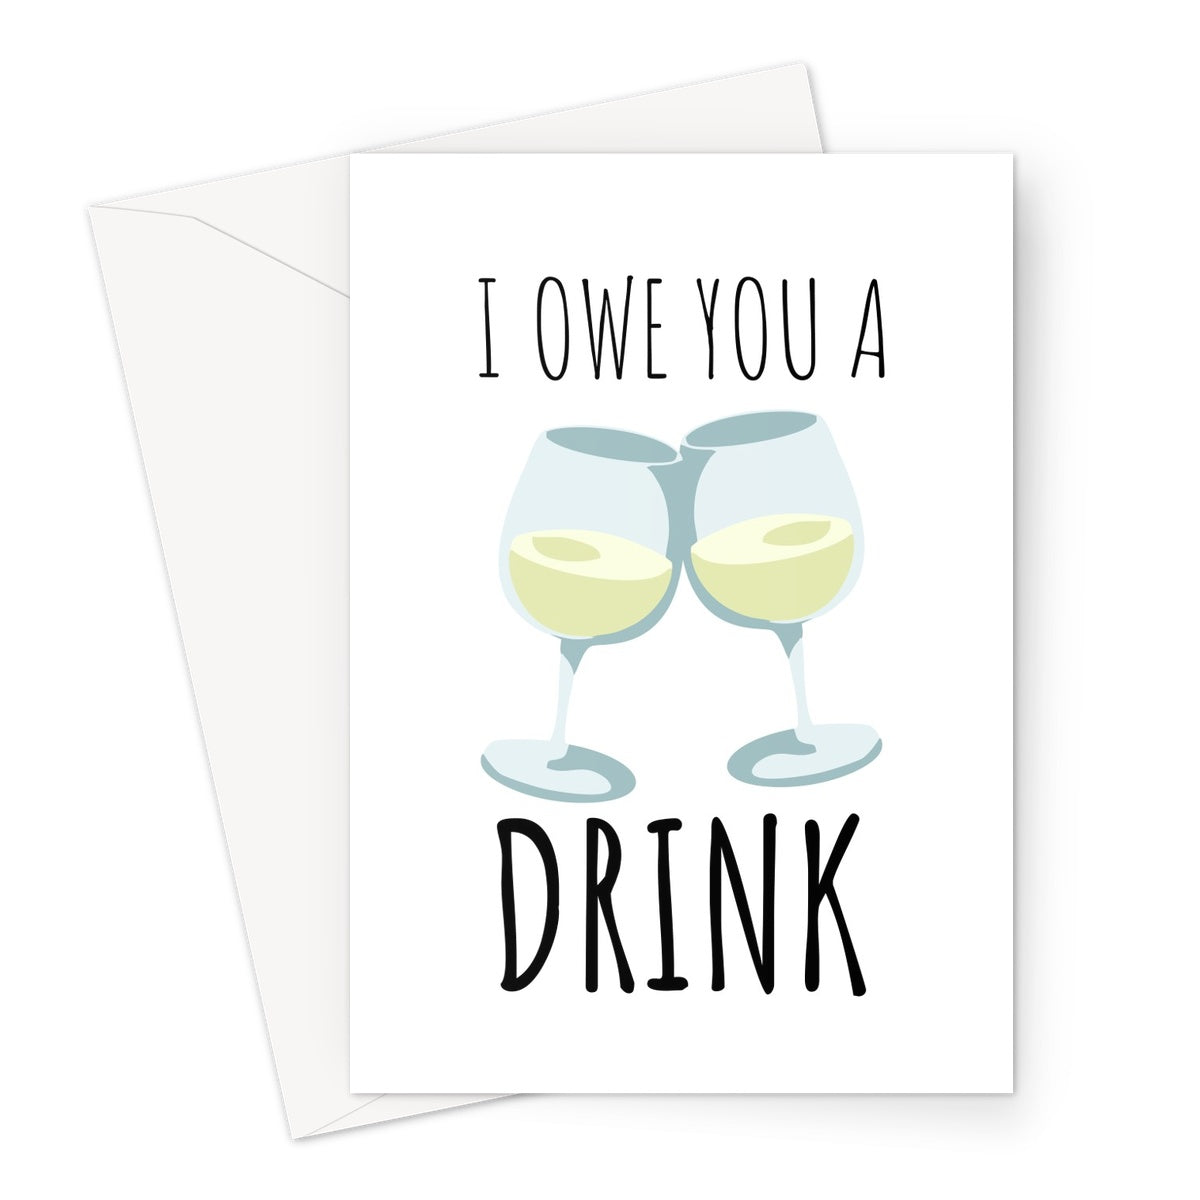 I Owe You A Drink Birthday Anniversary Friends Bar Pub Quarantine Isolation Miss You Funny Love Social Distance White Wine Fruit Glass Greeting Card